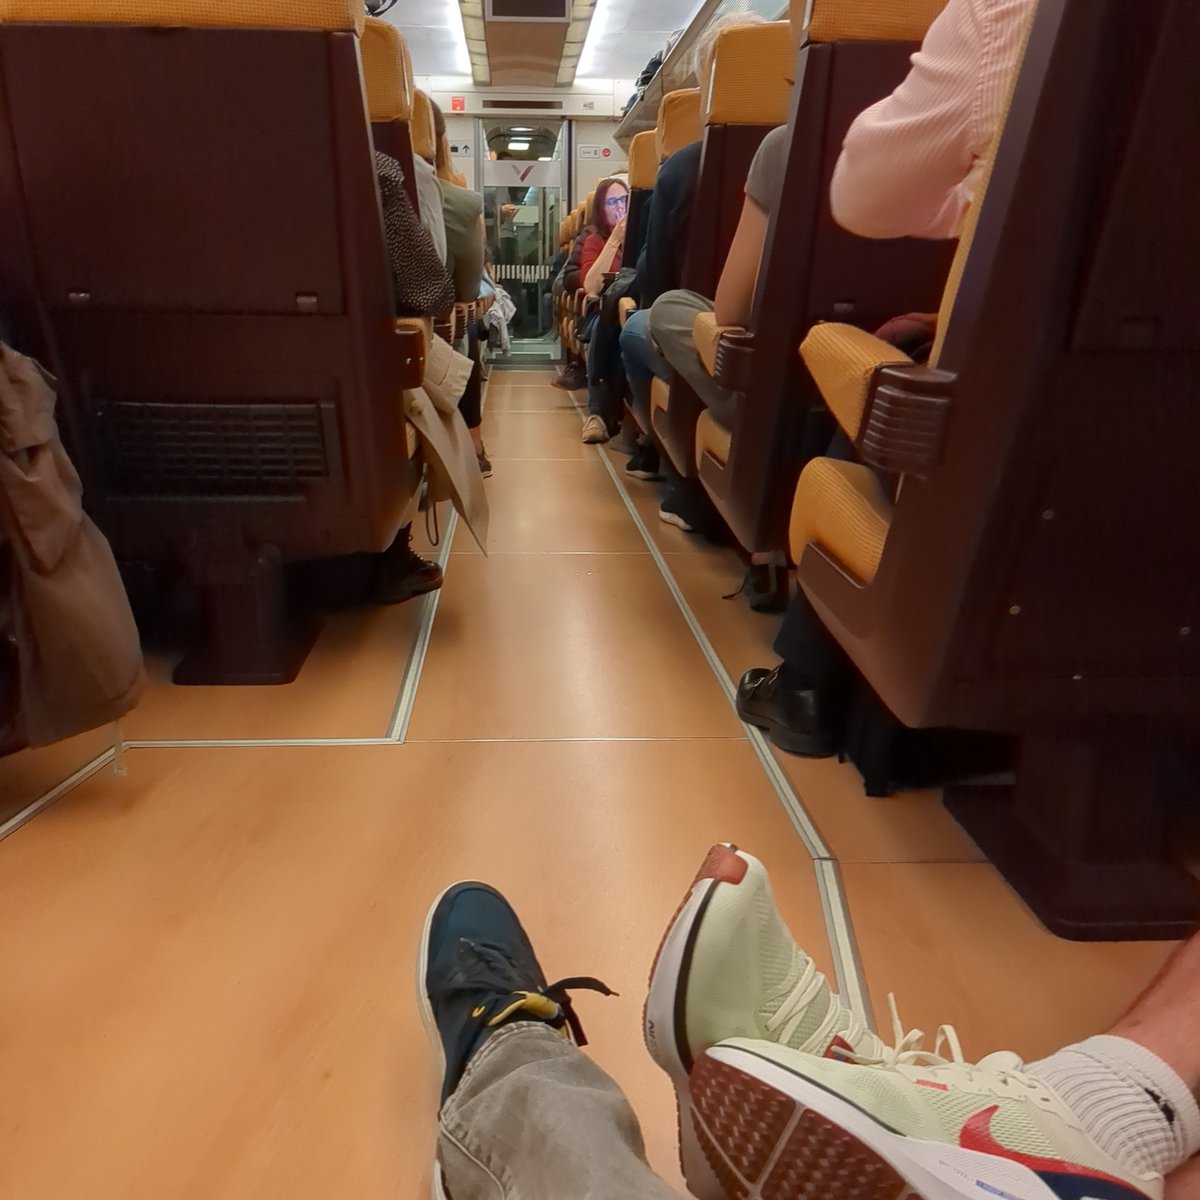 Paying 89€ for a train Barcelona - Lyon.
And having to sit down in the middle of the train.
@Renfe 
#ShameOnYou
#CustomerFeedback